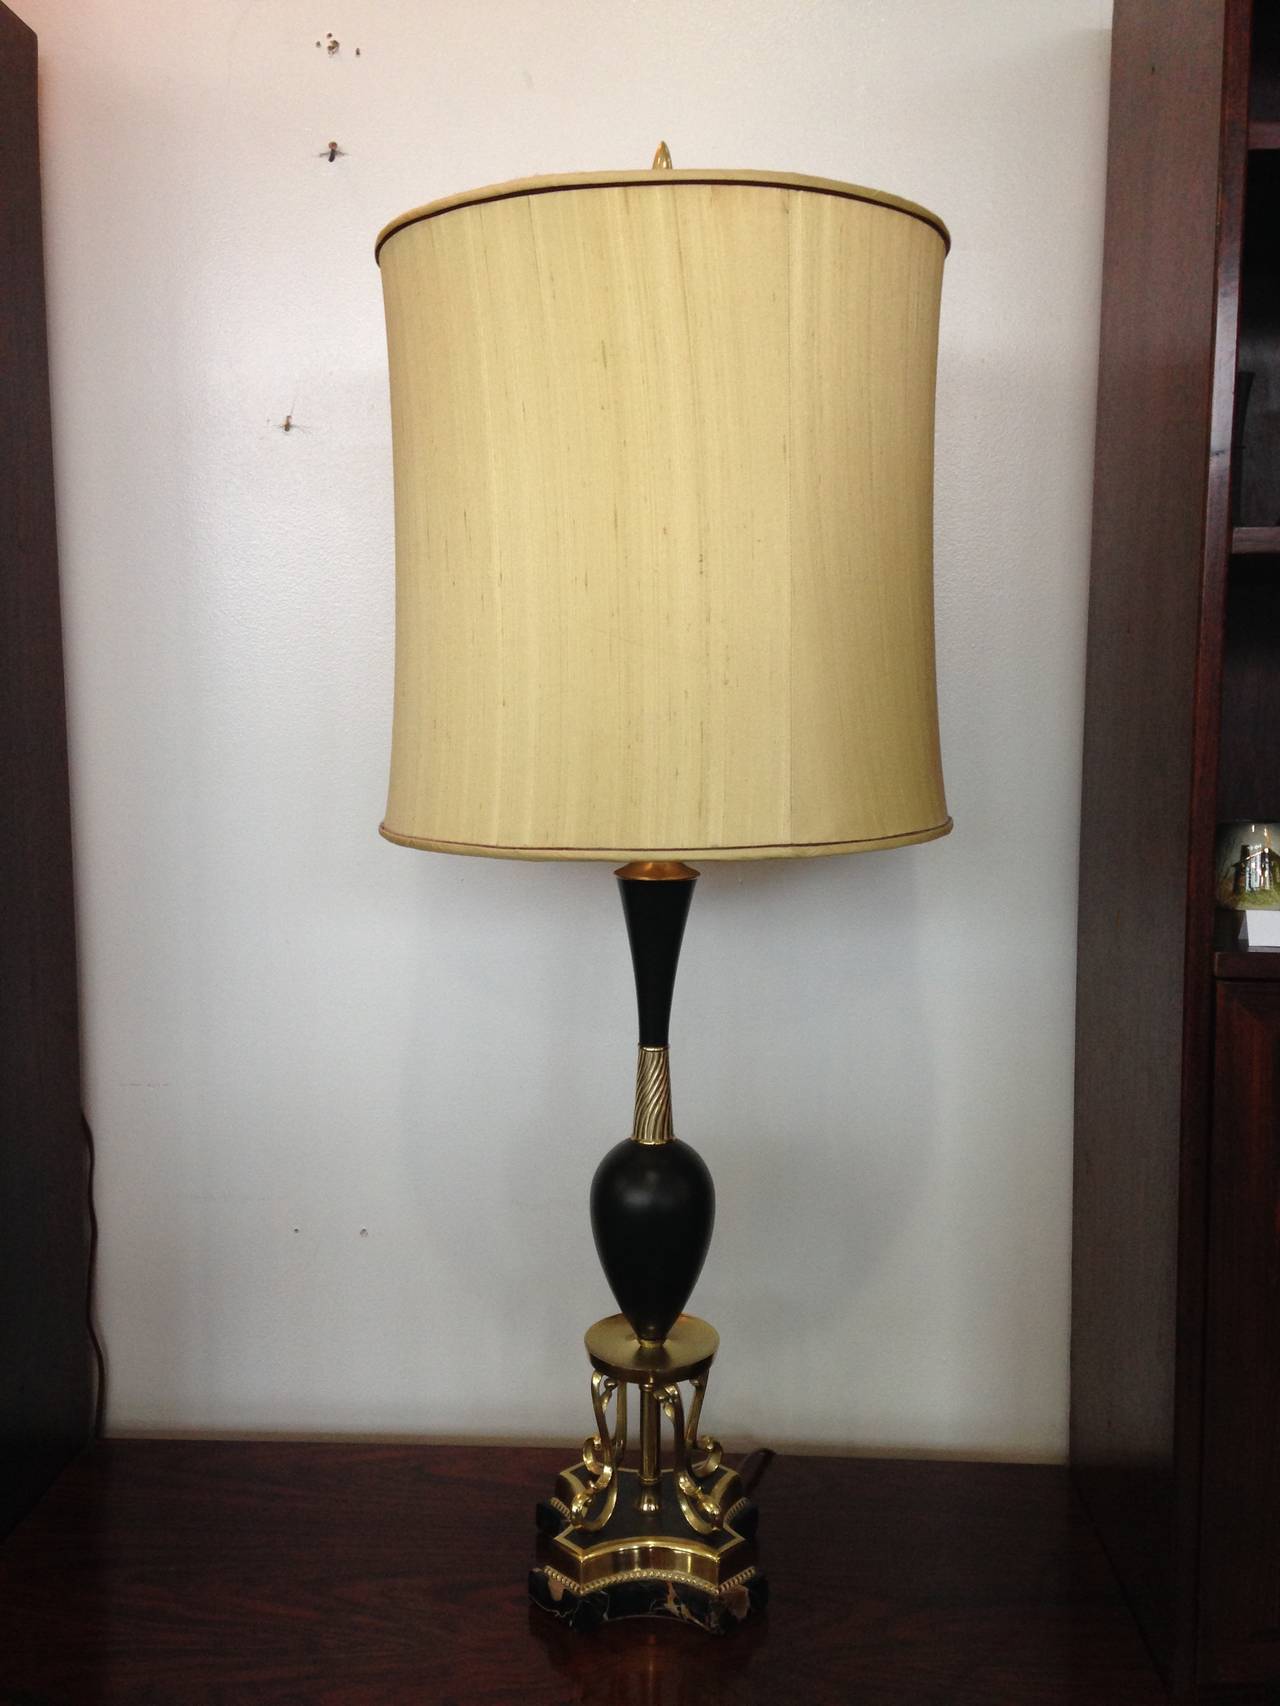 Beautiful pair of lamps in immaculate condition. No chips or issues to mentions on the lamps themselves. One shade has a tear on the inner linings. You can buy these lamps and not include the shades if you would like.